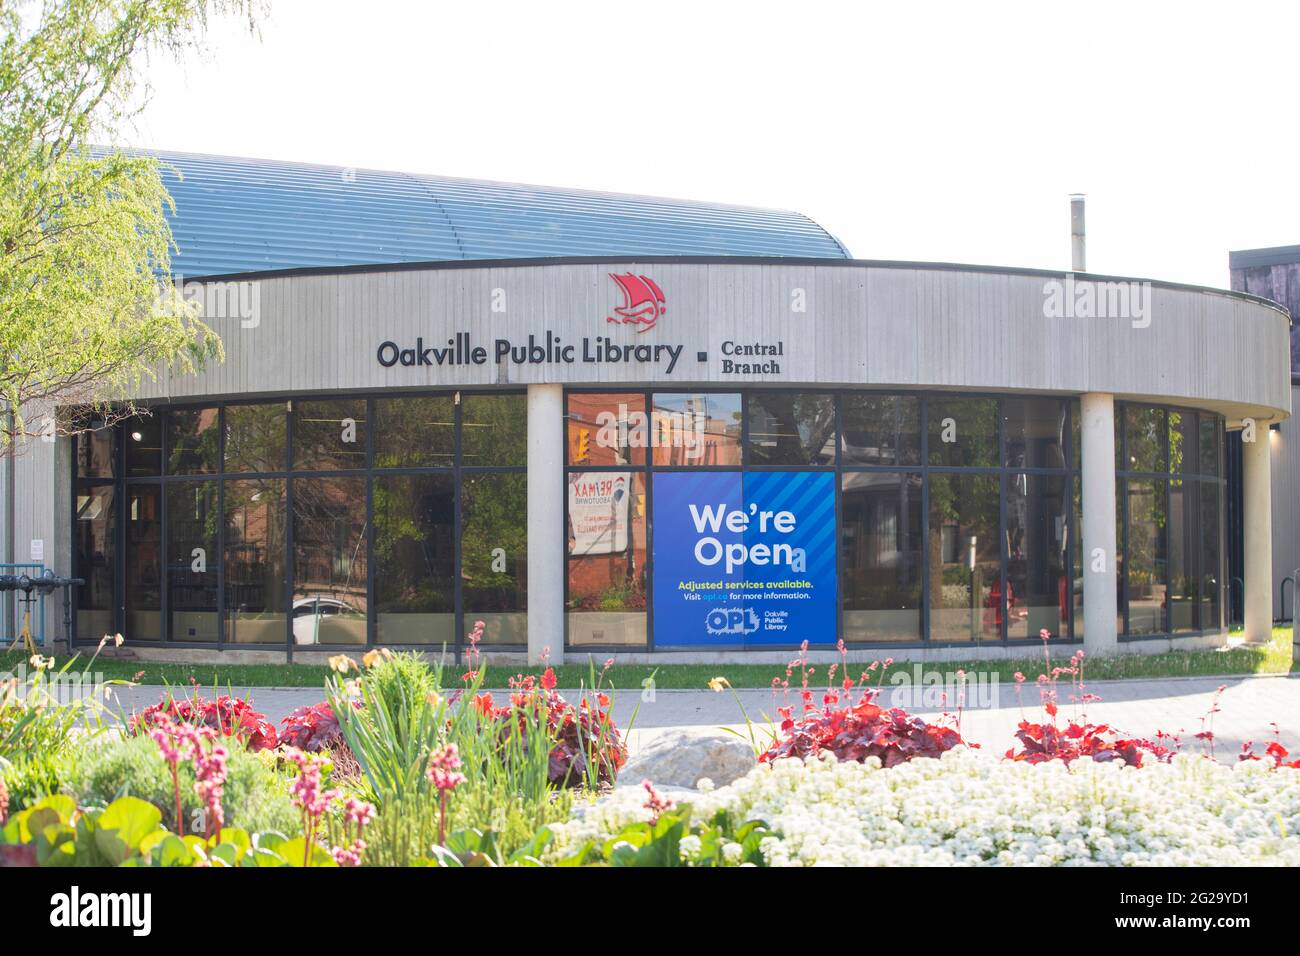 Oakville Public Library central branch building. A sign says we're open, public places will gradually reopen after pandemic. Stock Photo